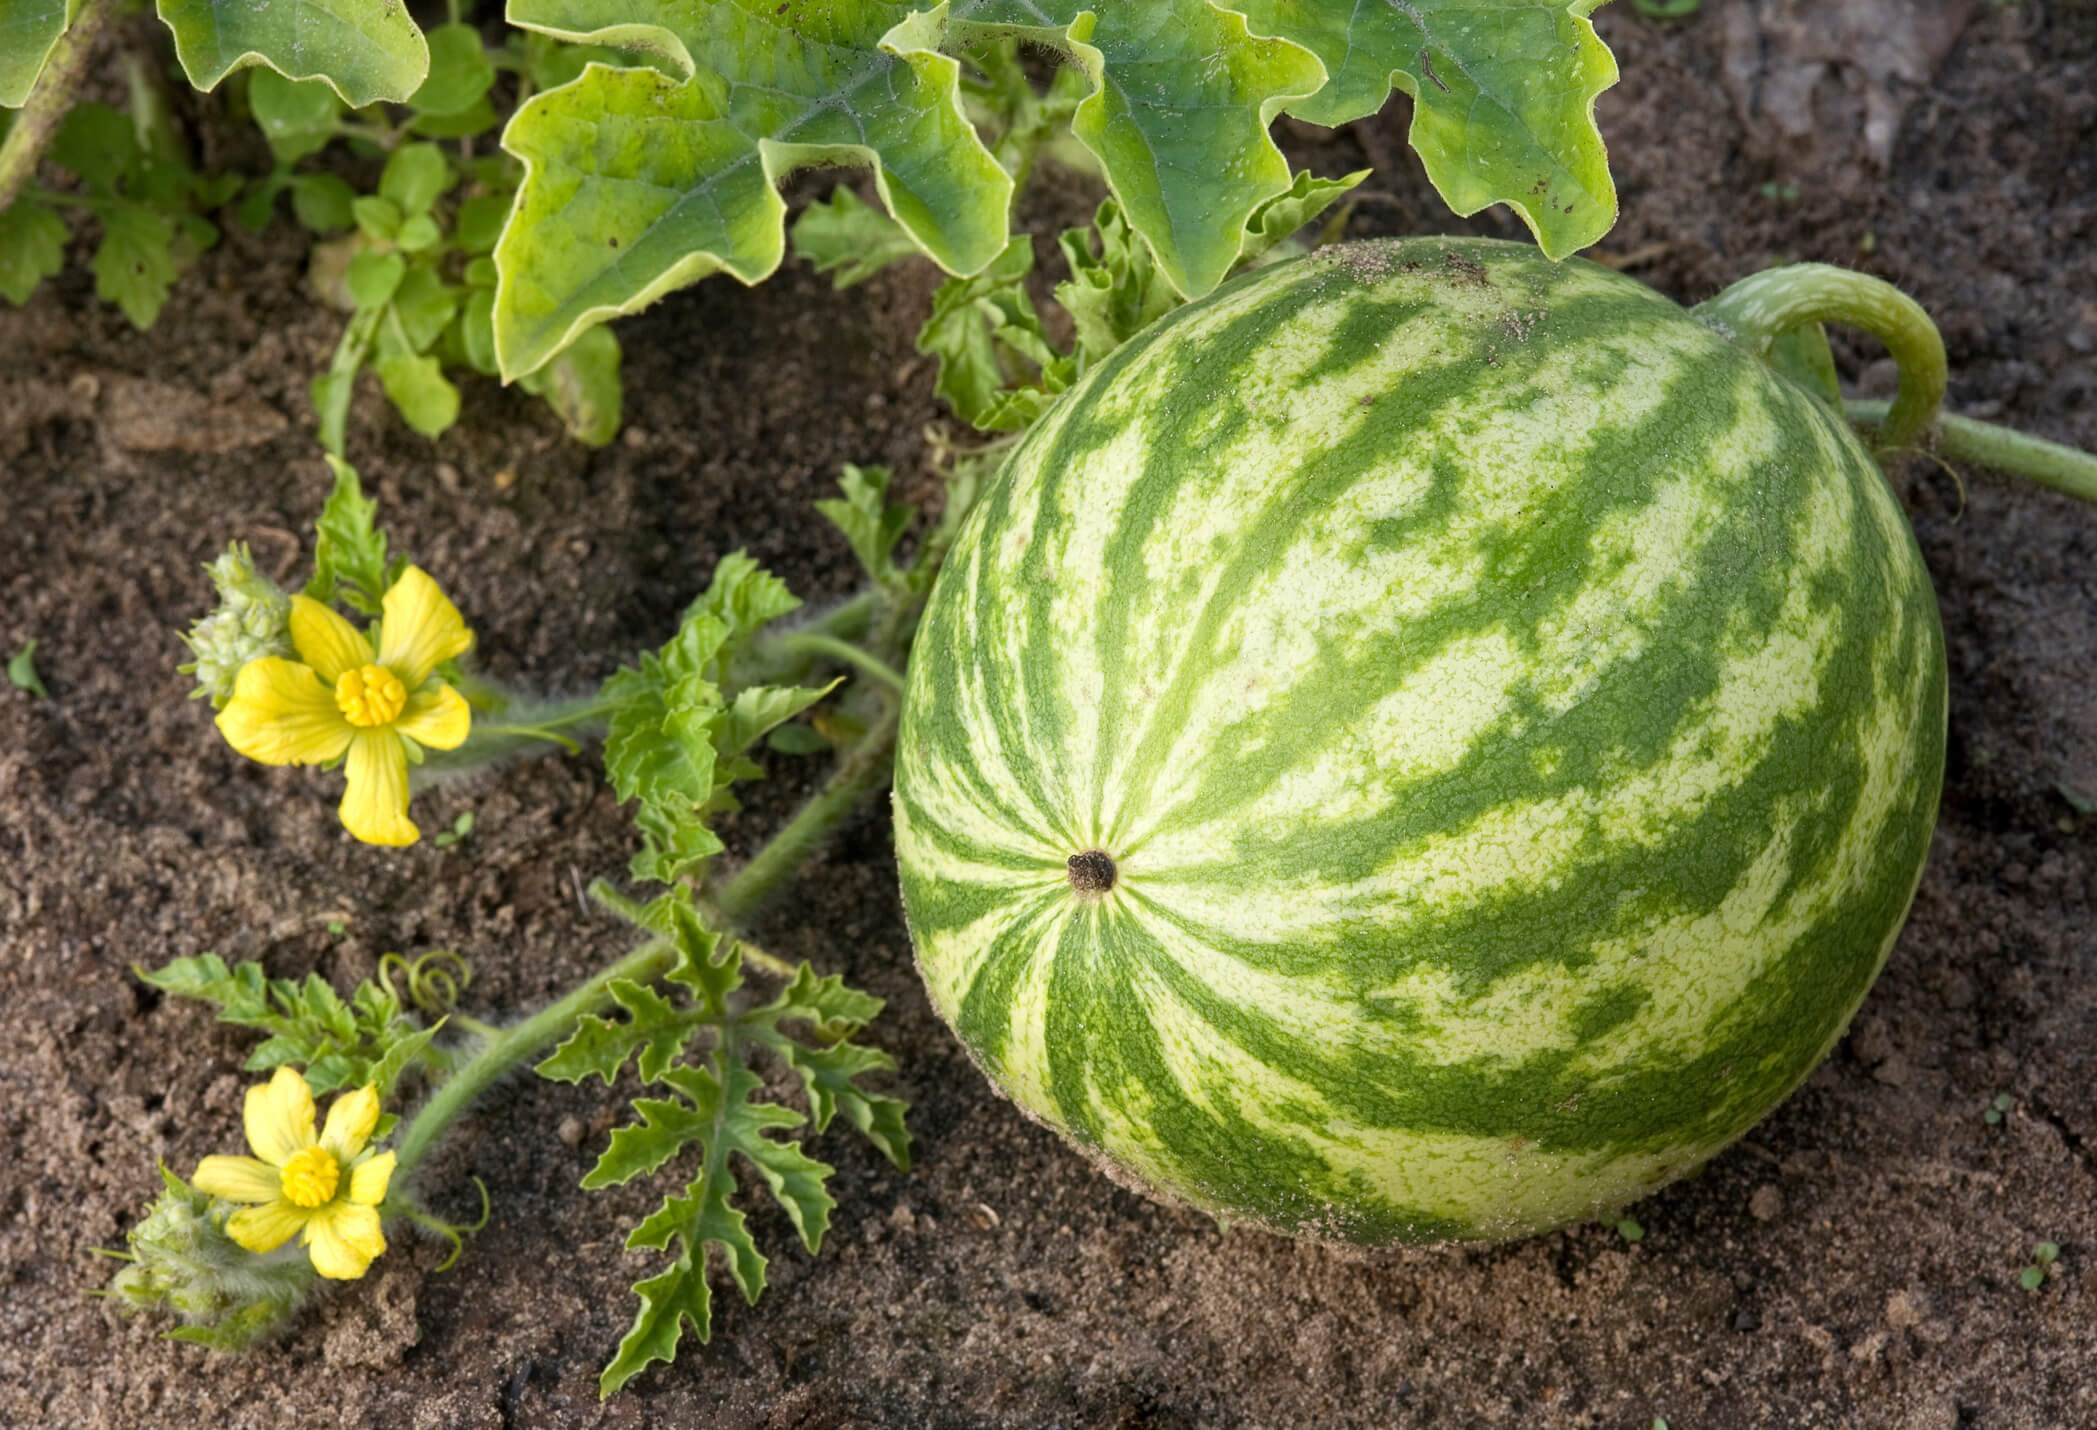 How to Grow Watermelon: 5 Tips For Planting & Harvesting ...